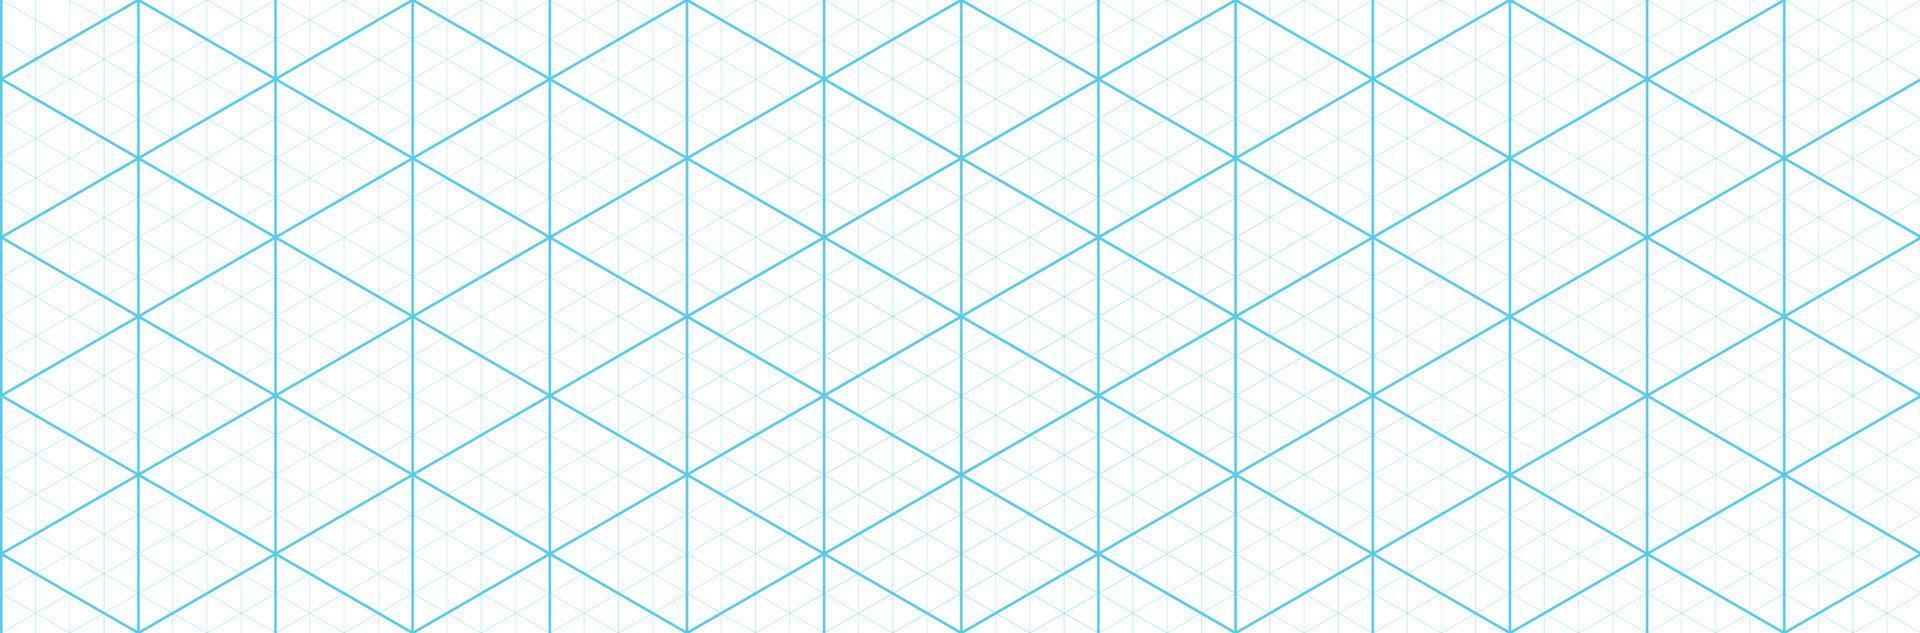 Blue isometric grid graph paper background. Seamless pattern guide background. Desigh for engineering or mechanical layout drawing. Vector illustration